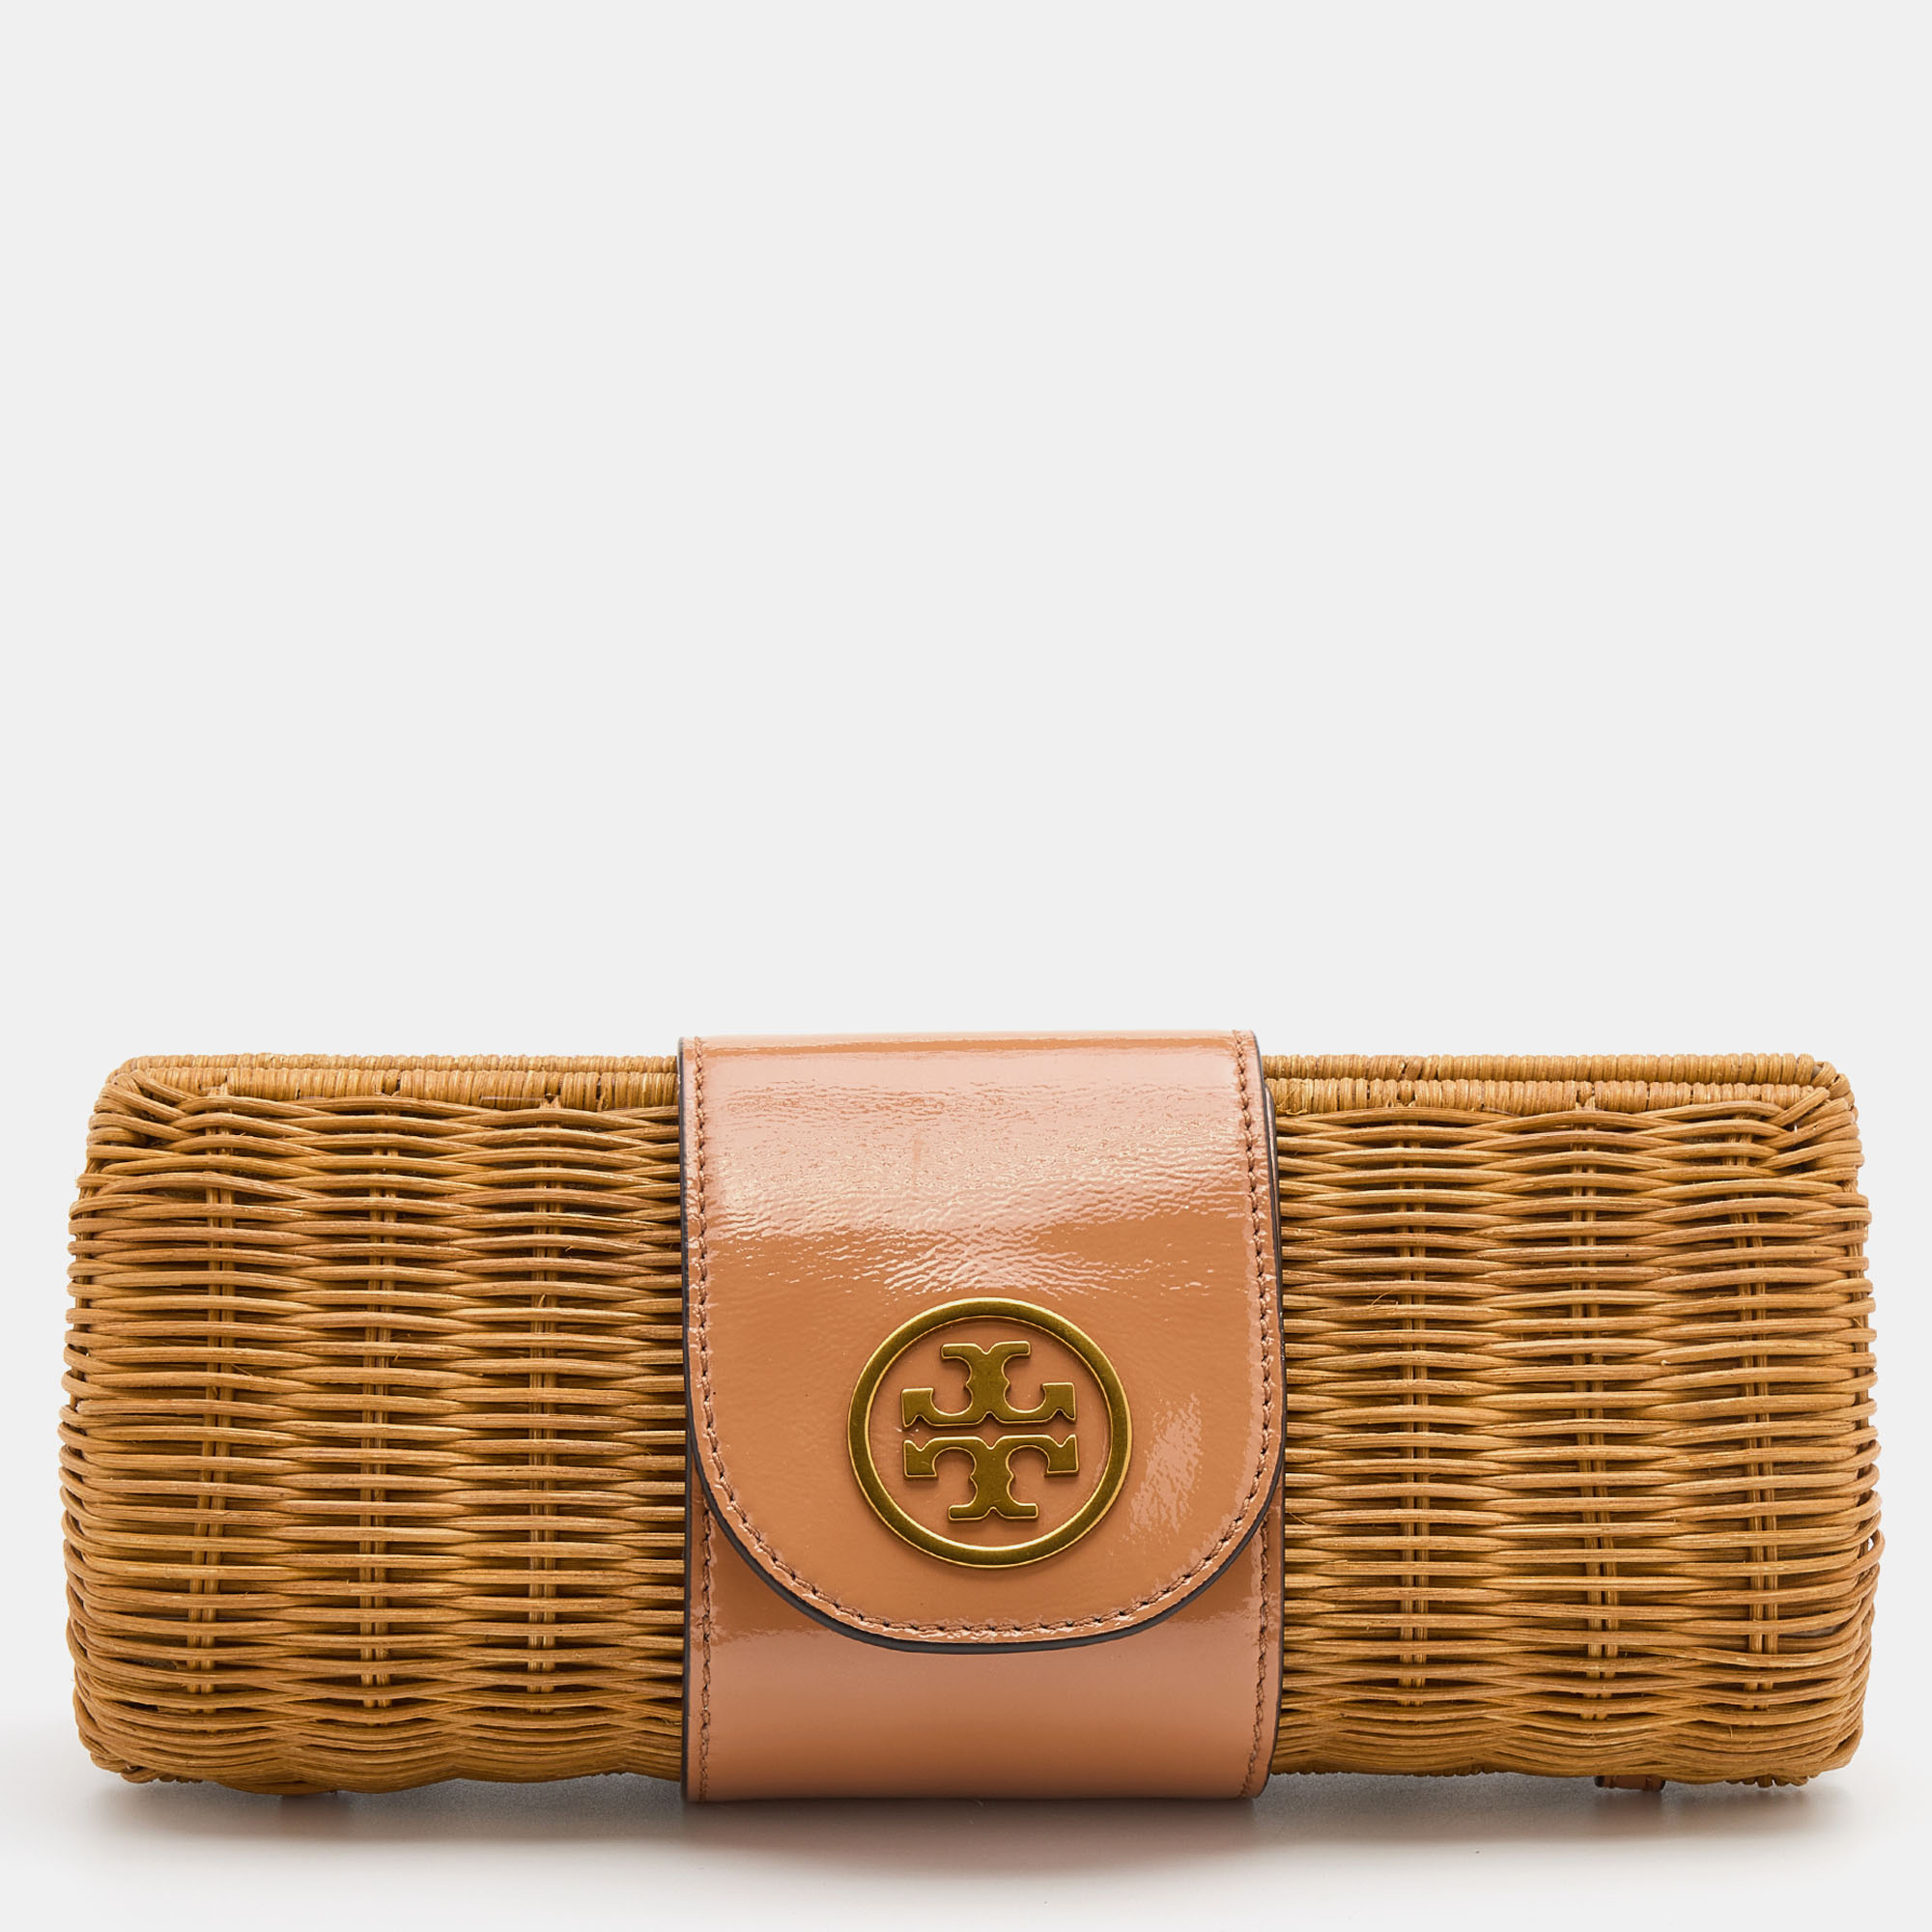 Pre-owned Tory Burch Tan/beige Woven Rattan And Patent Leather Clutch